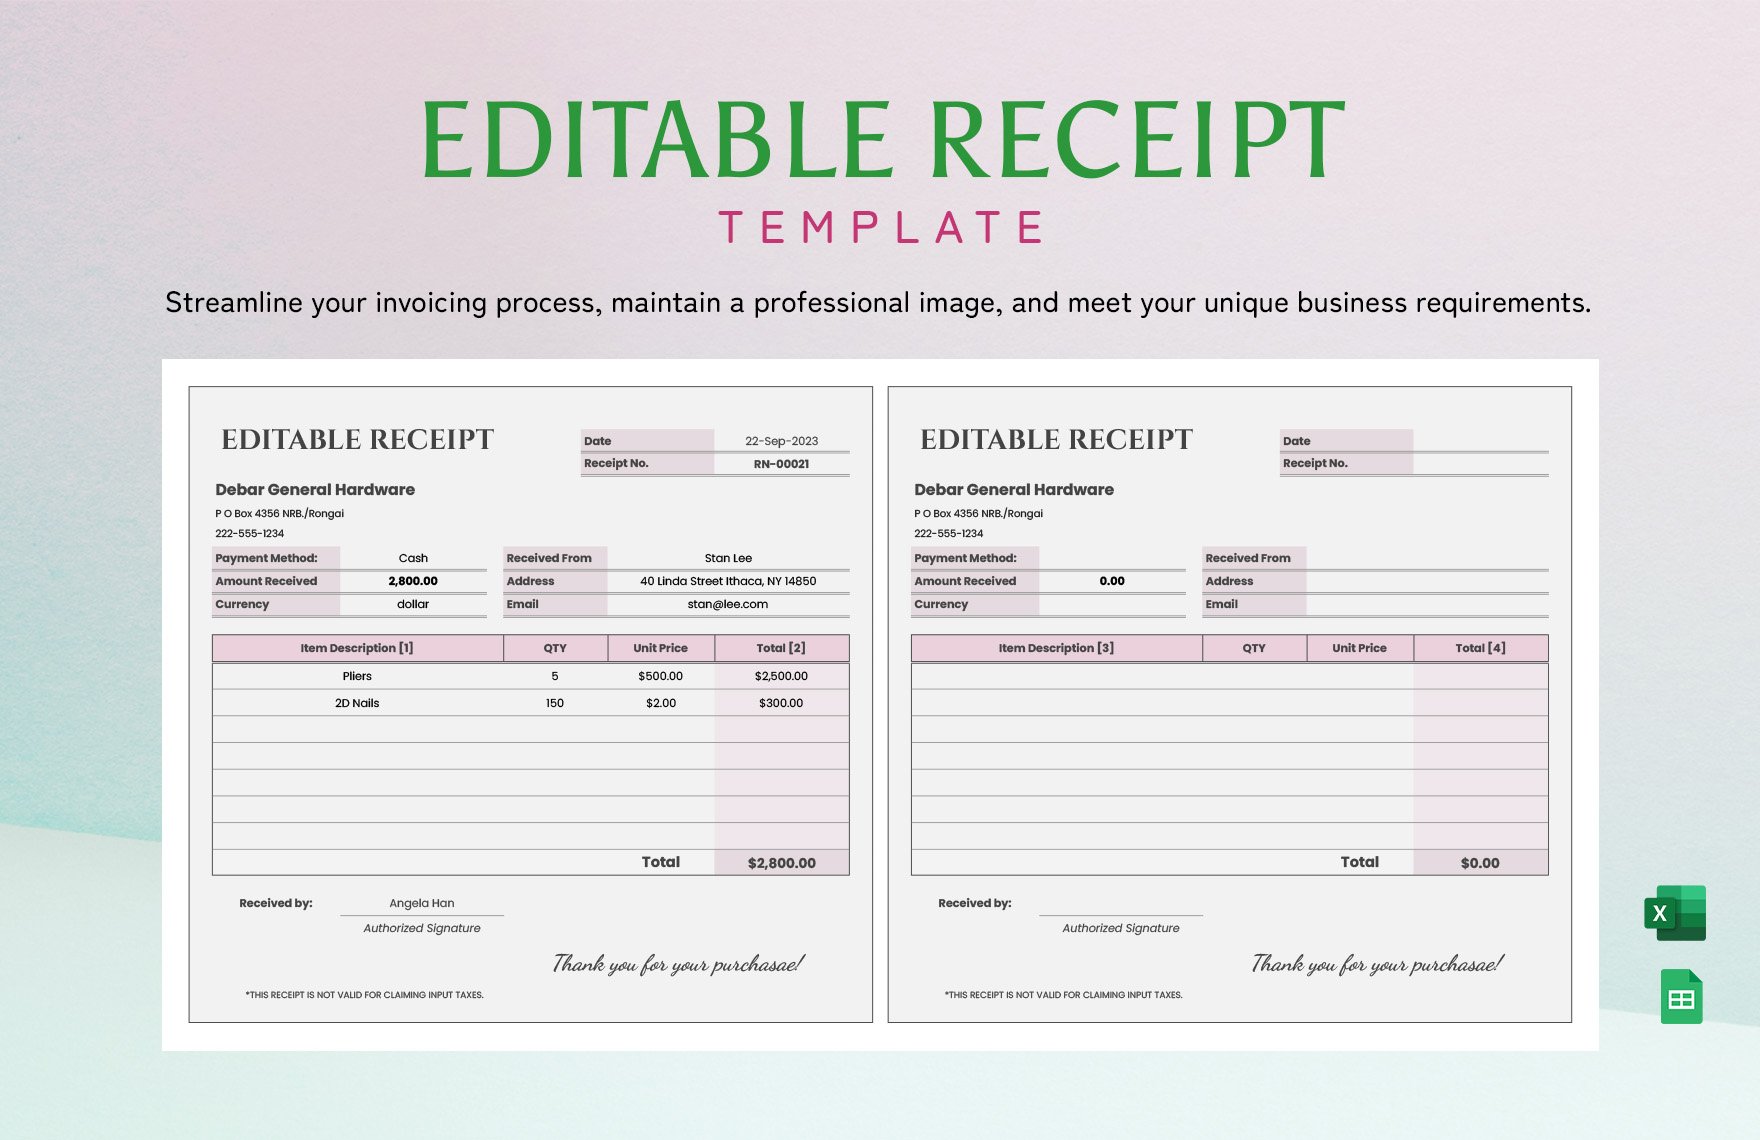 Free Editable Receipt Template in Excel, Google Sheets